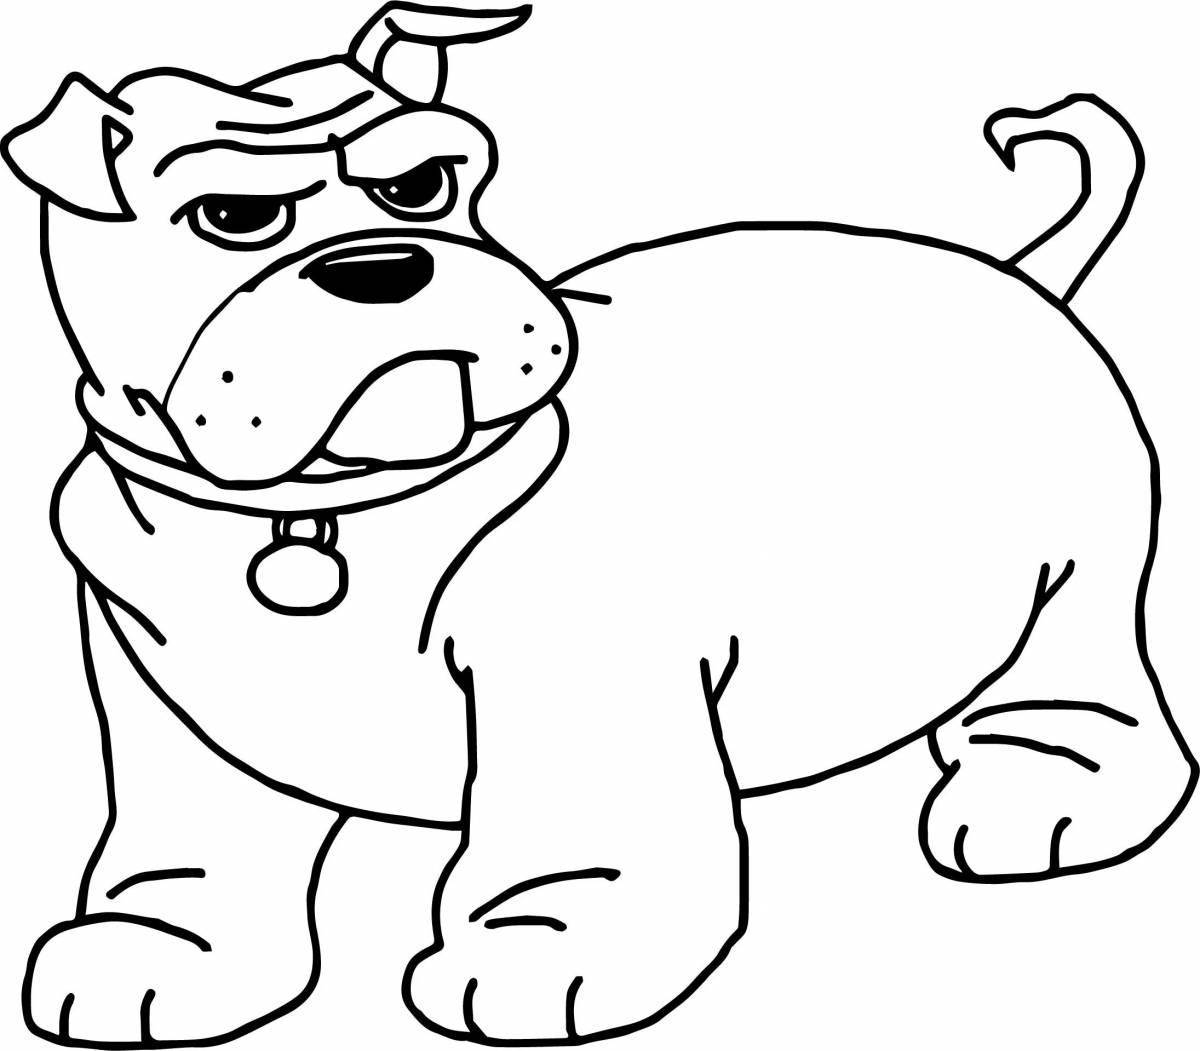 Hank's colorful coloring page